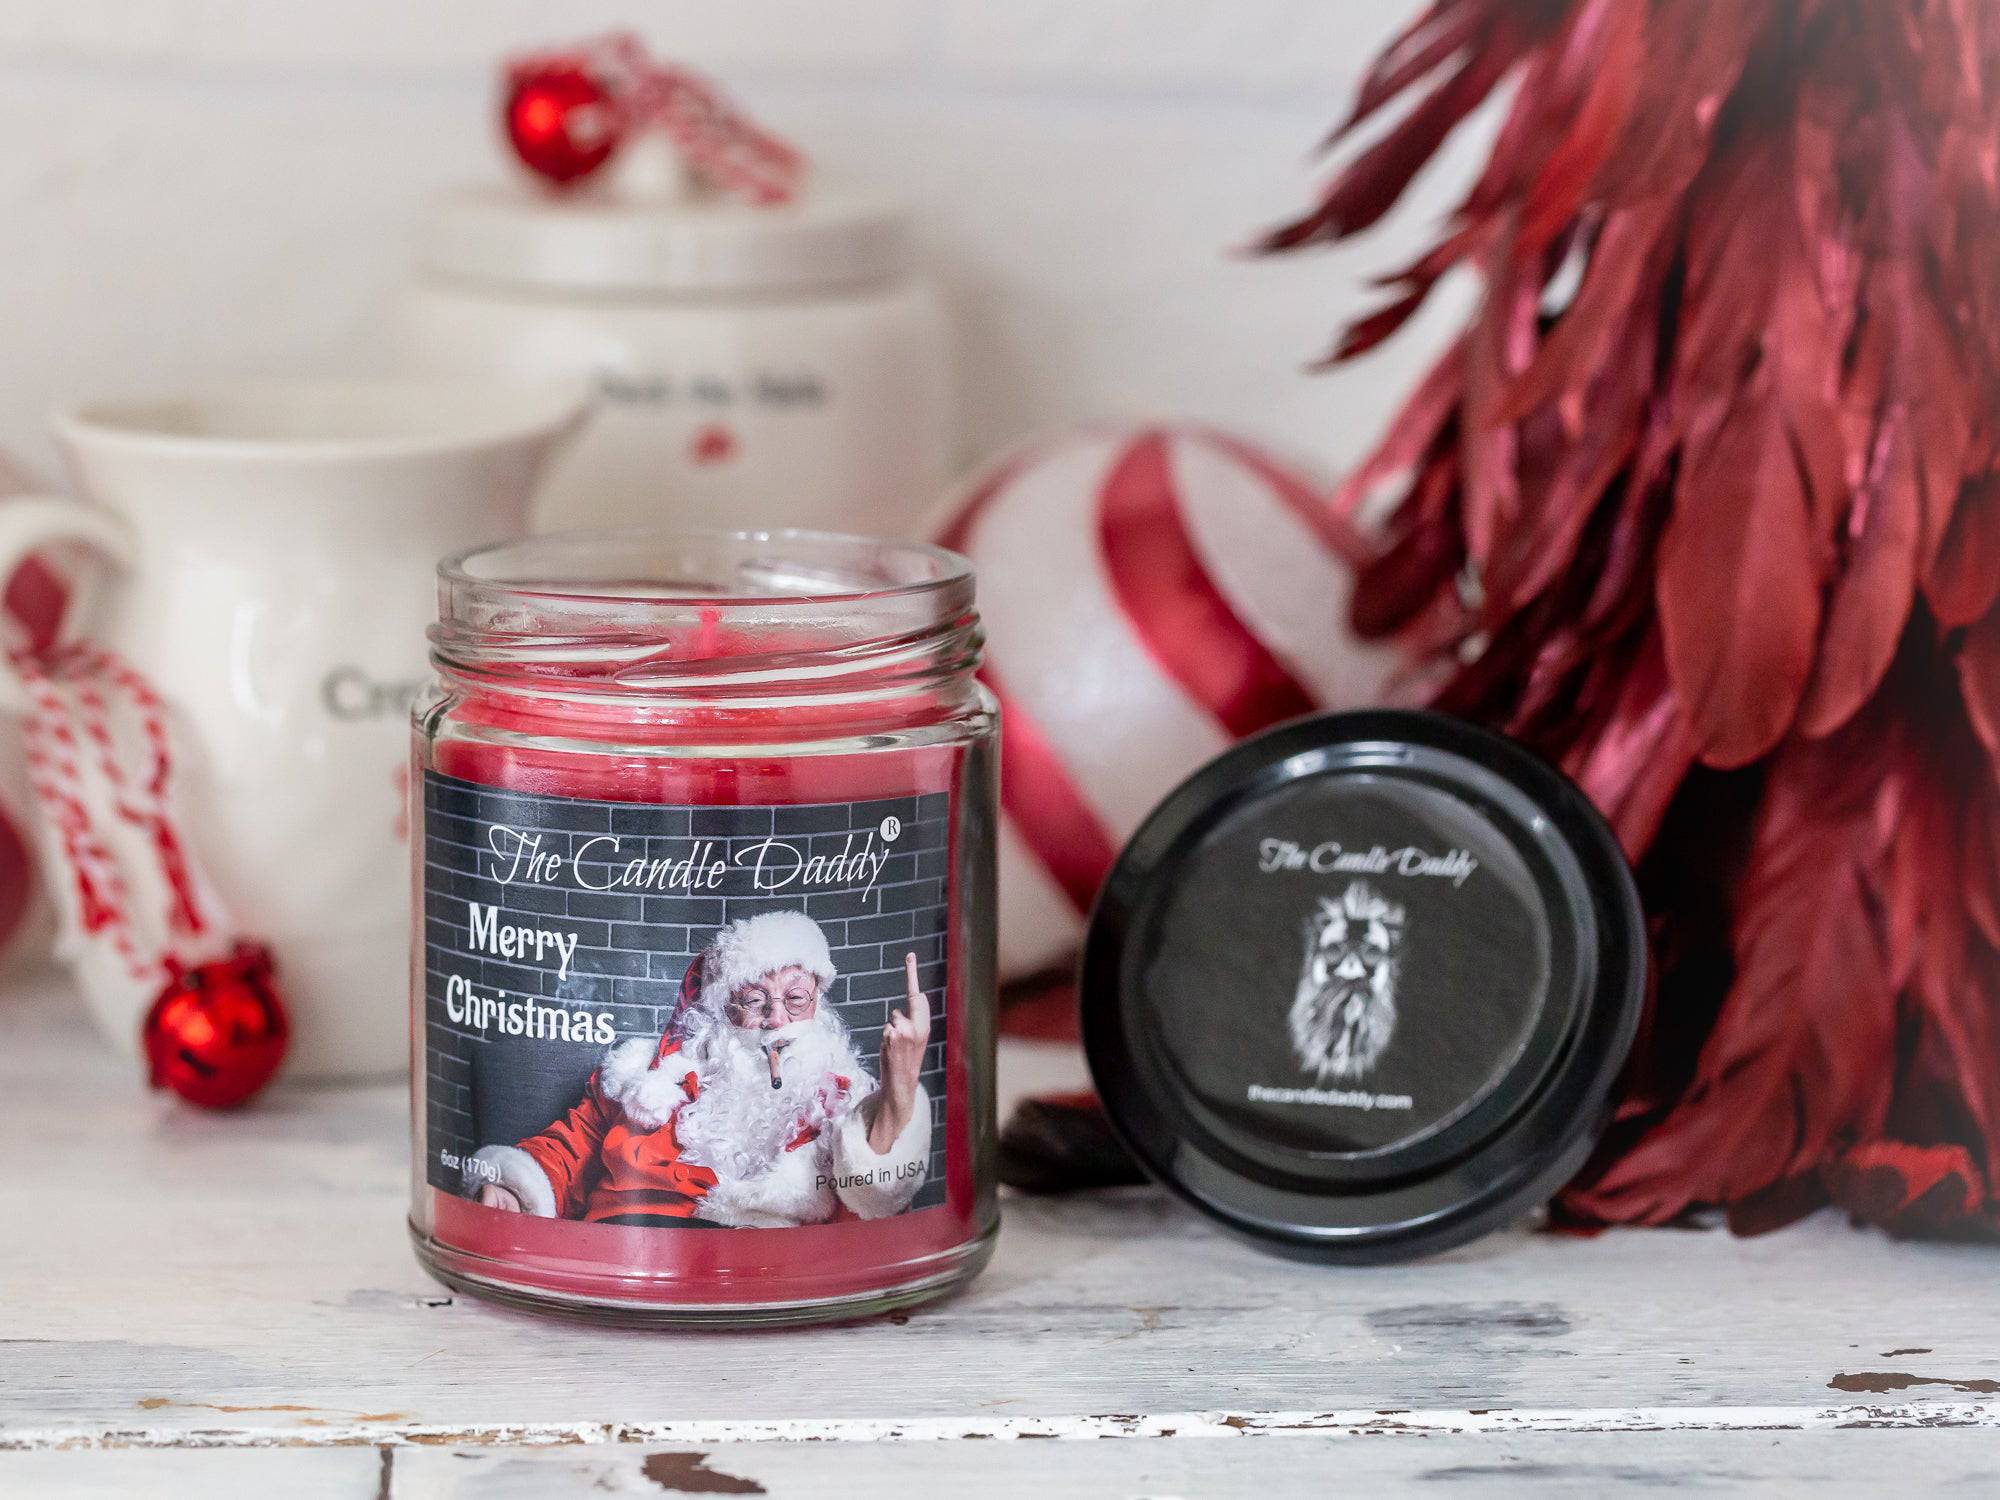 Merry Christmas (Santa Bird) Holiday Candle - Funny Christmas Day Scented  Candle - Funny Holiday Candle for Christmas, New Years - Long Burn Time,  Holiday Fragrance, Hand Poured in USA - 6oz